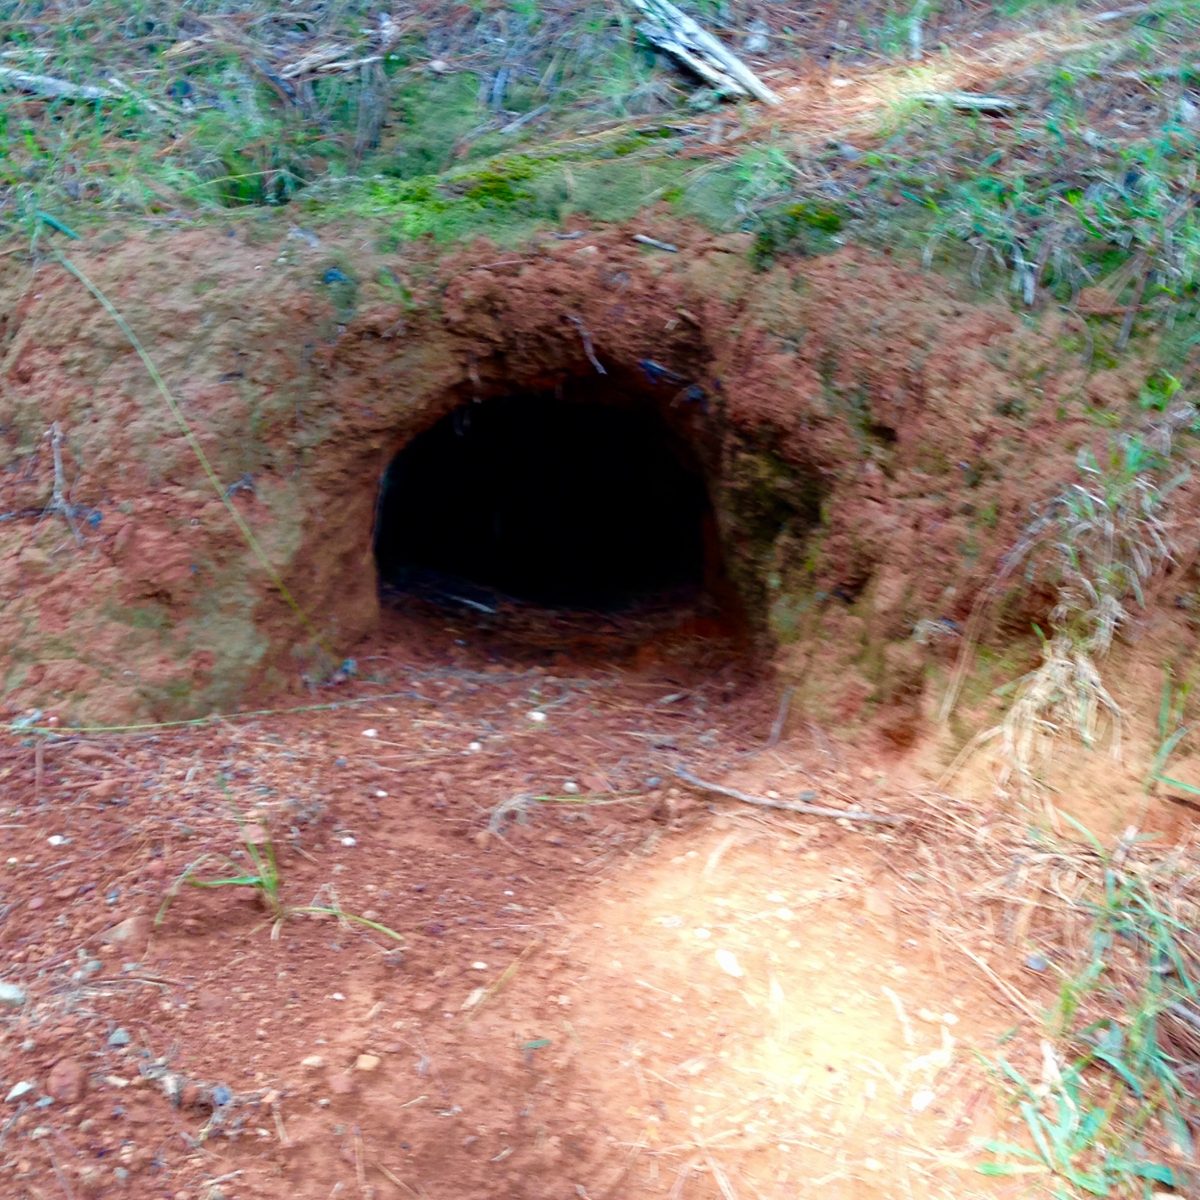 Is anyone home? - a wombat lives here